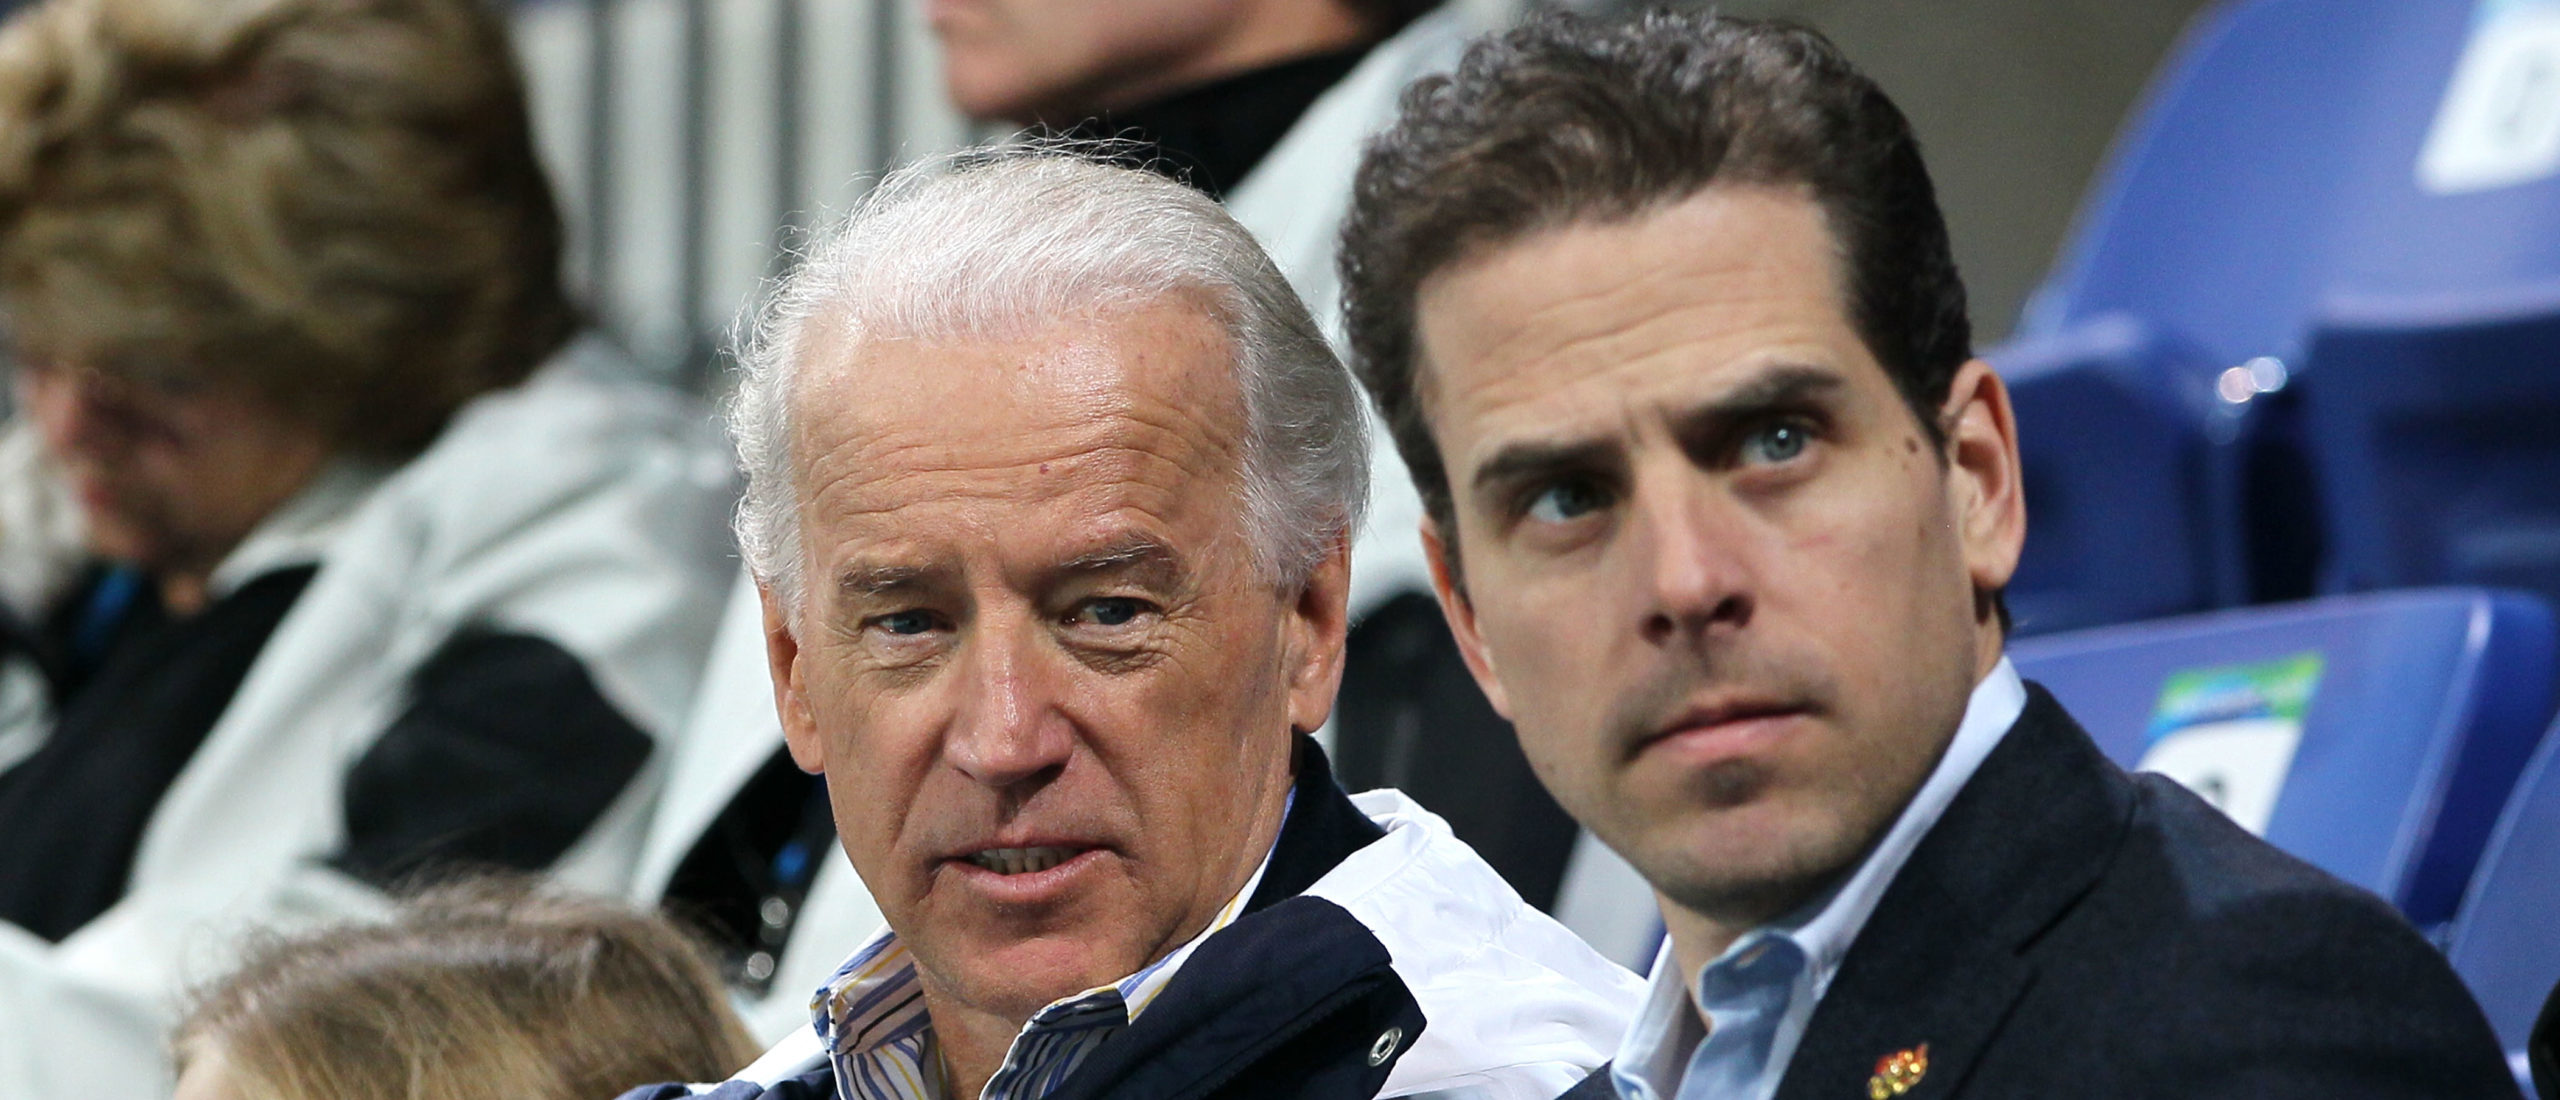 Hunter Biden Joe Biden NYT Lawsuit Getty scaled e1643738107574 | New York Times Files Lawsuit Against The State Department For Hunter Biden’s Emails | The Paradise